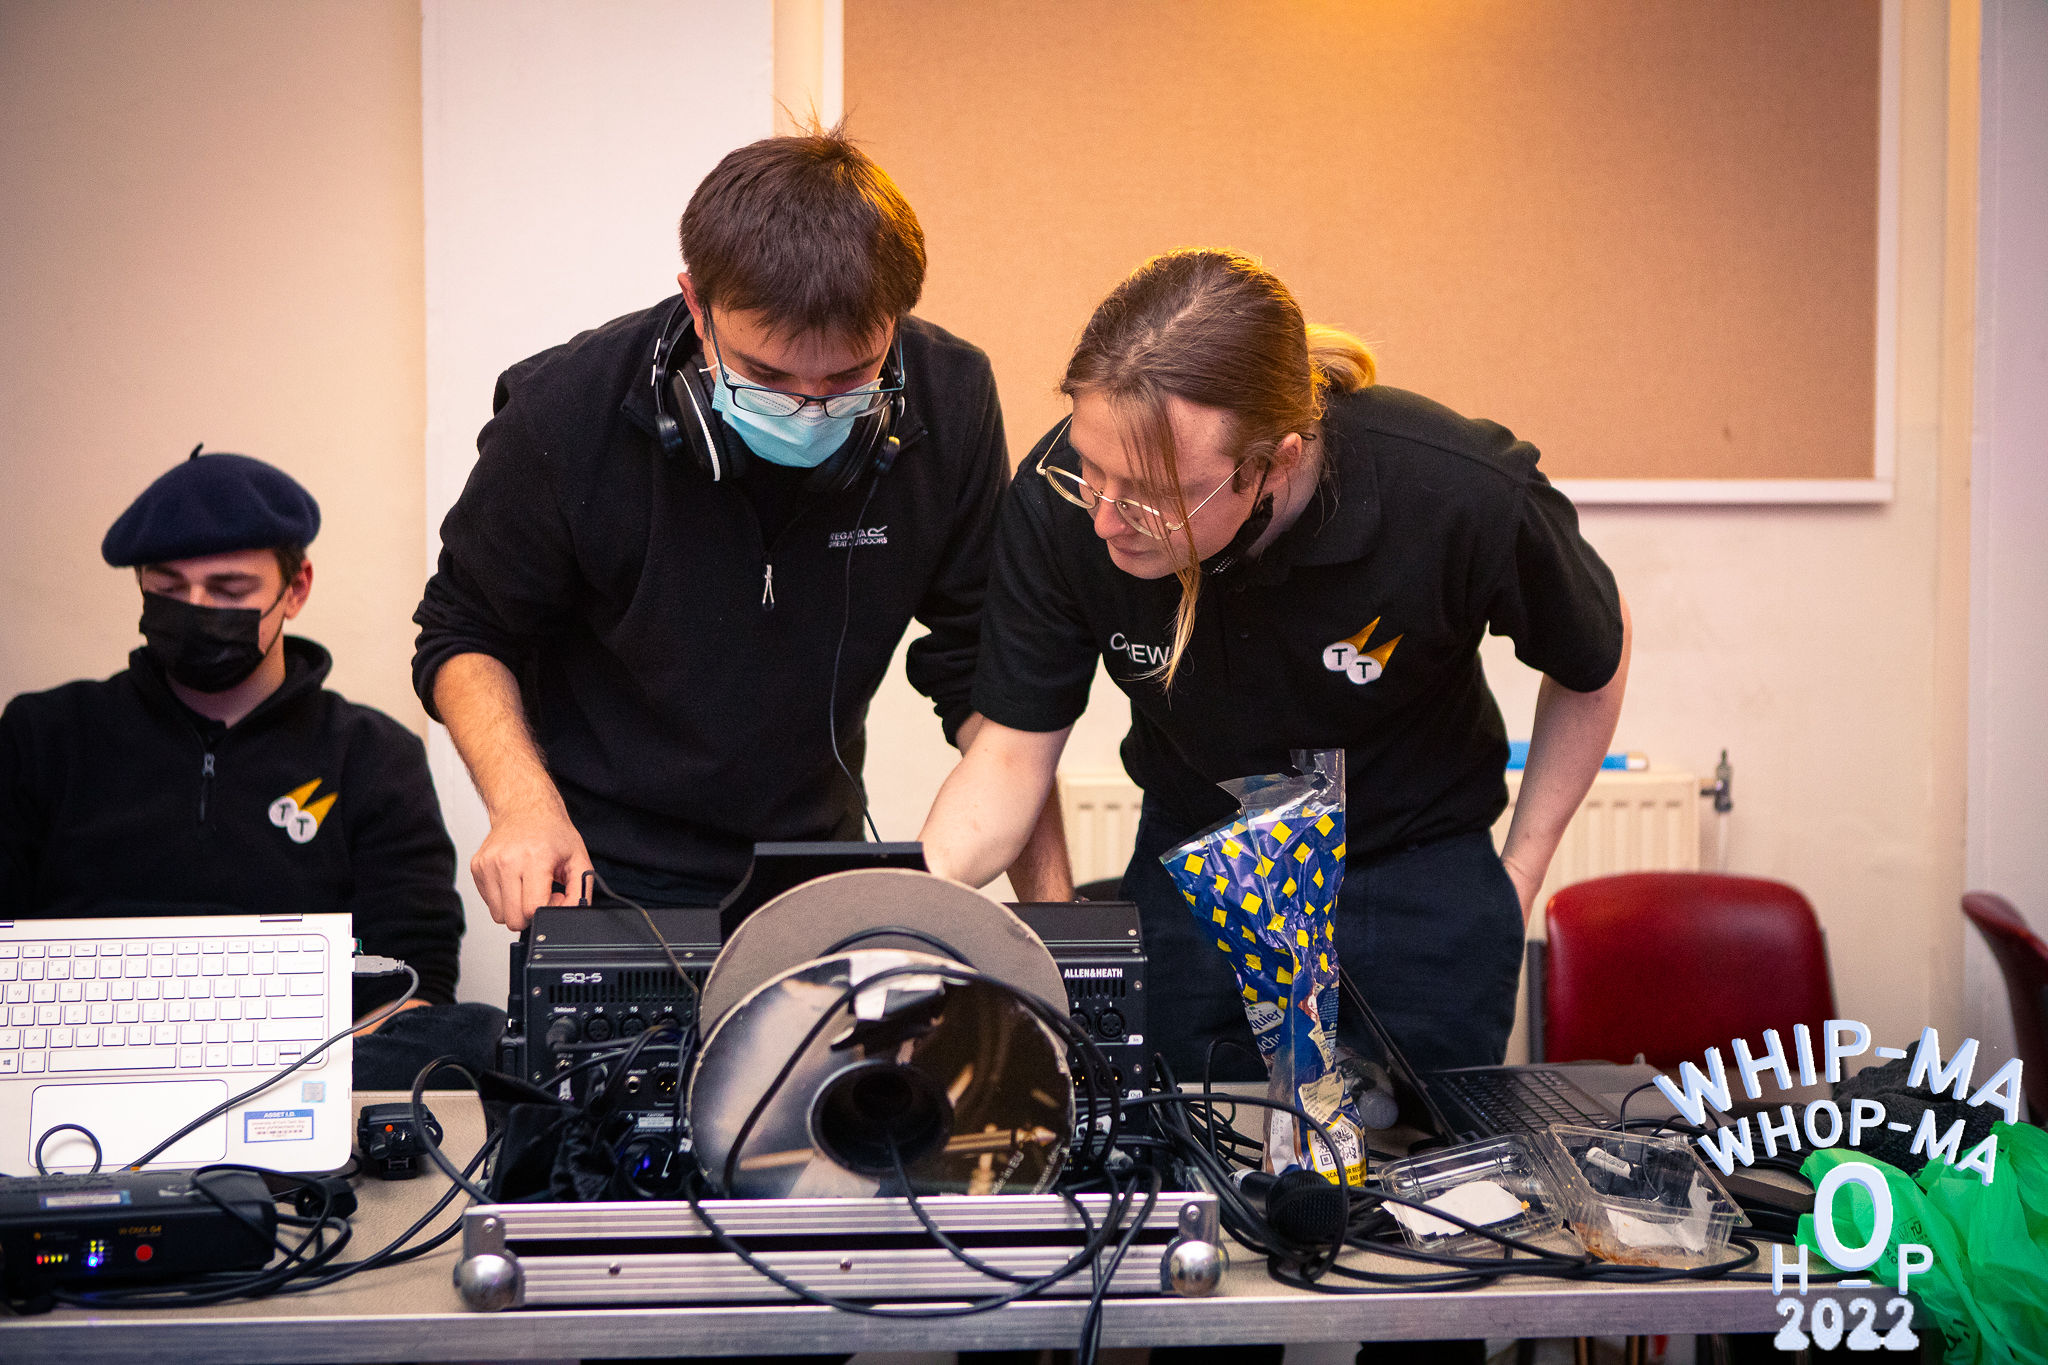 Three society members operating at an event